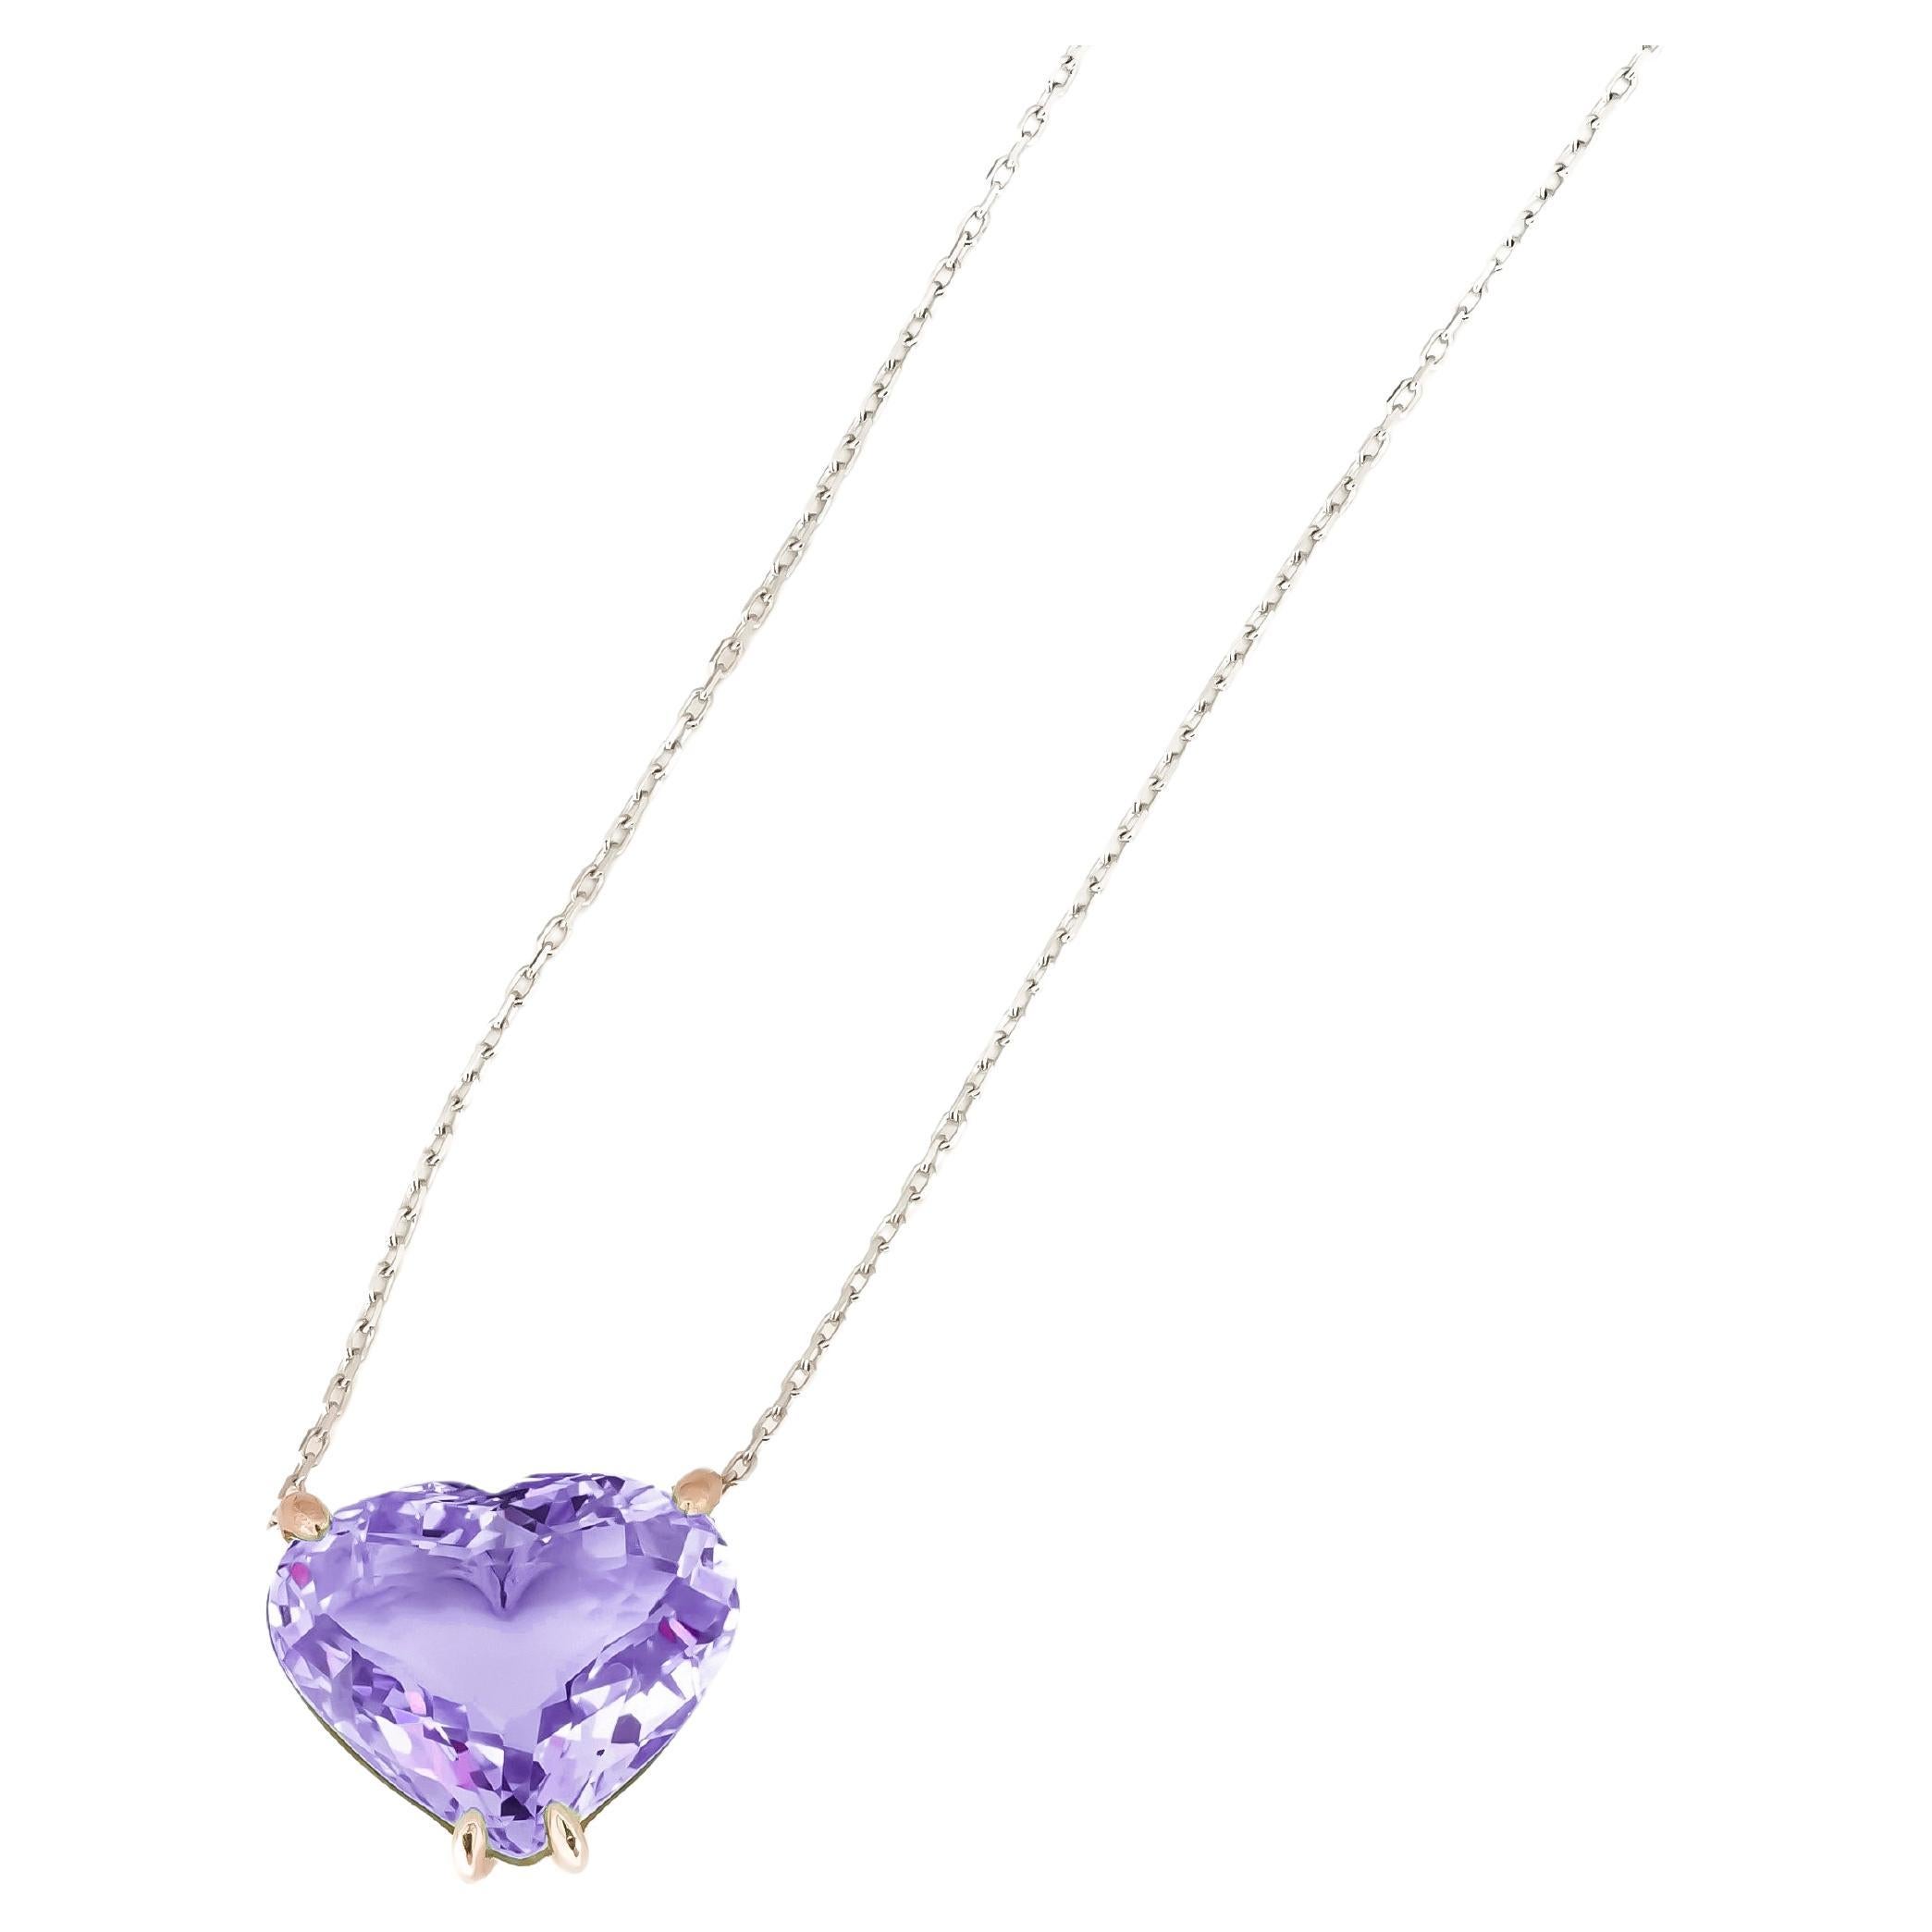 Heart shaped amethyst pendant necklace in 14k gold.  For Sale